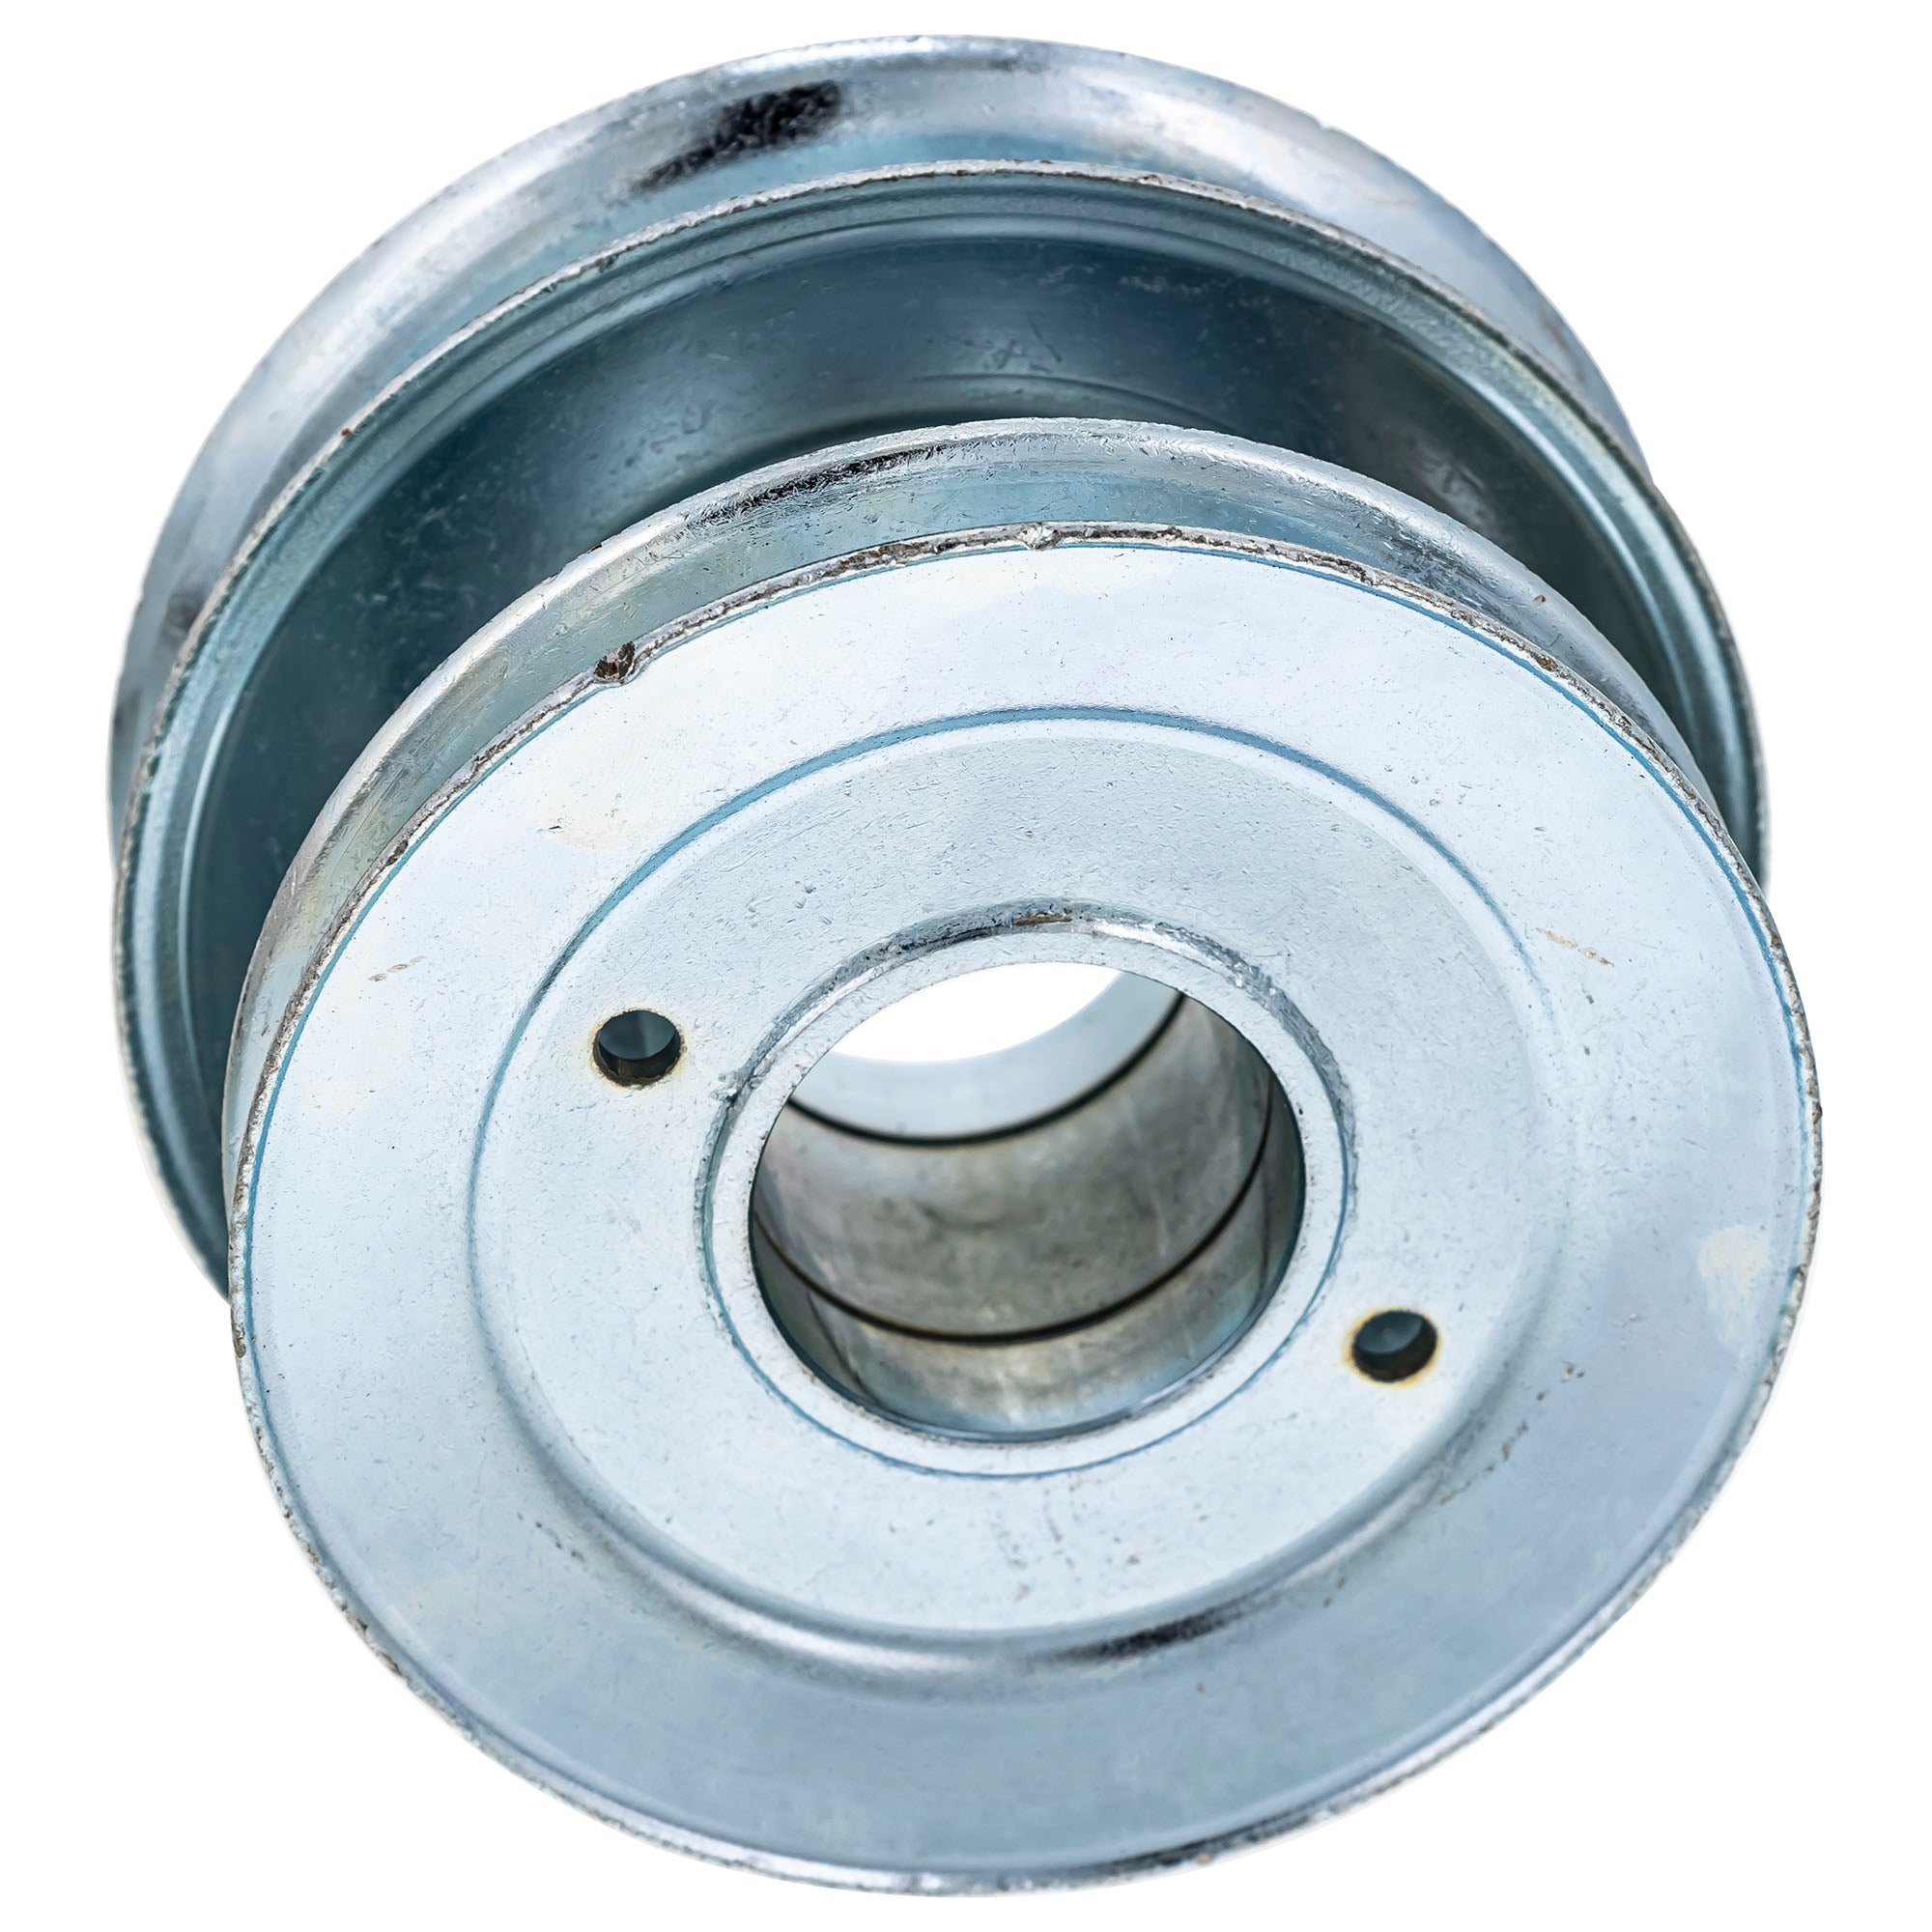 756-3115  Double Pulley 5.065/4.659 GT 44 54 2554 2550 2544 2523